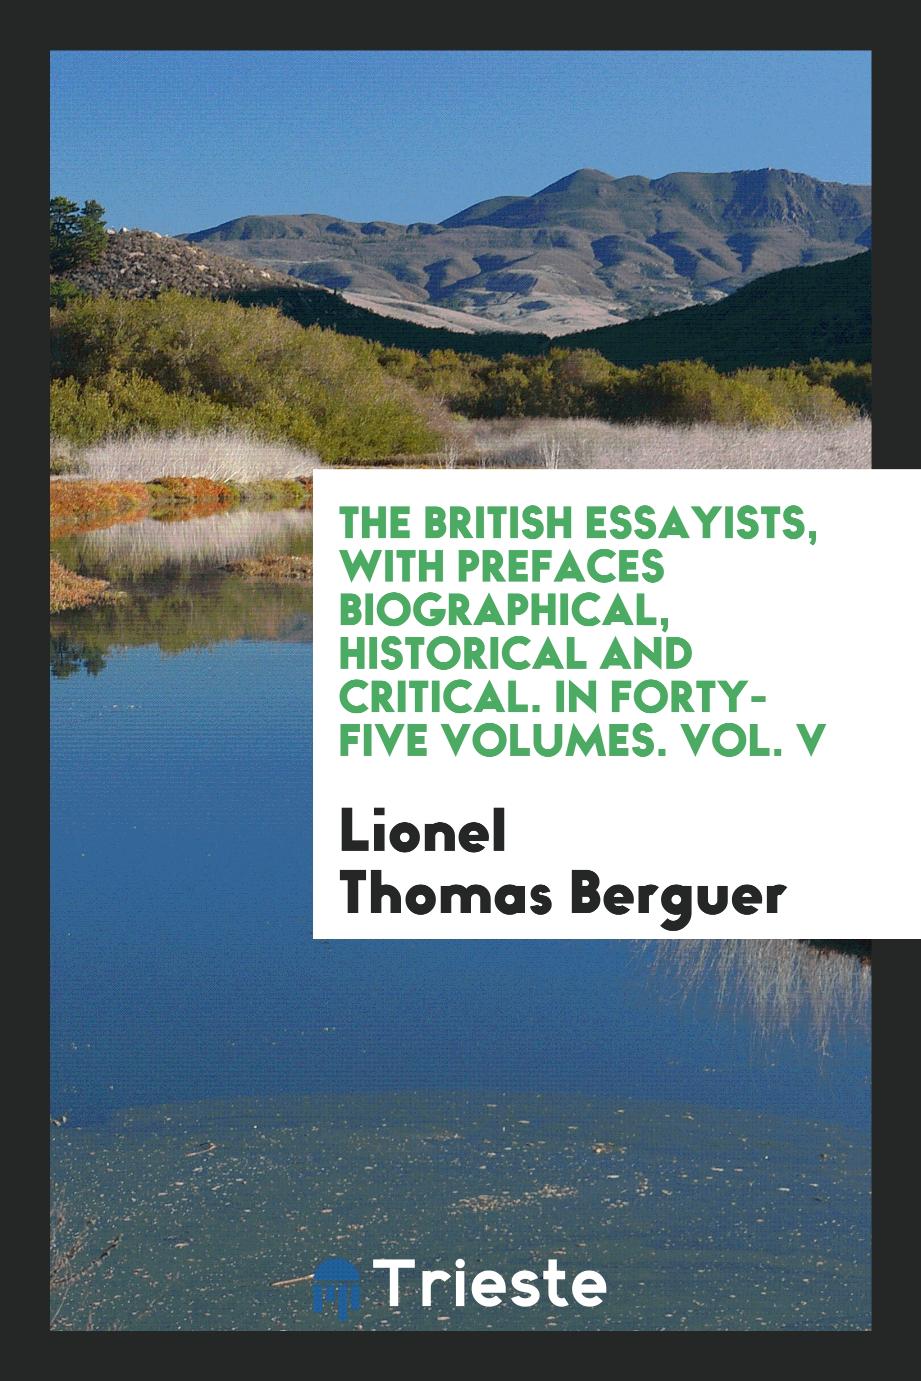 The British essayists, with prefaces biographical, historical and critical. In forty-five volumes. Vol. V